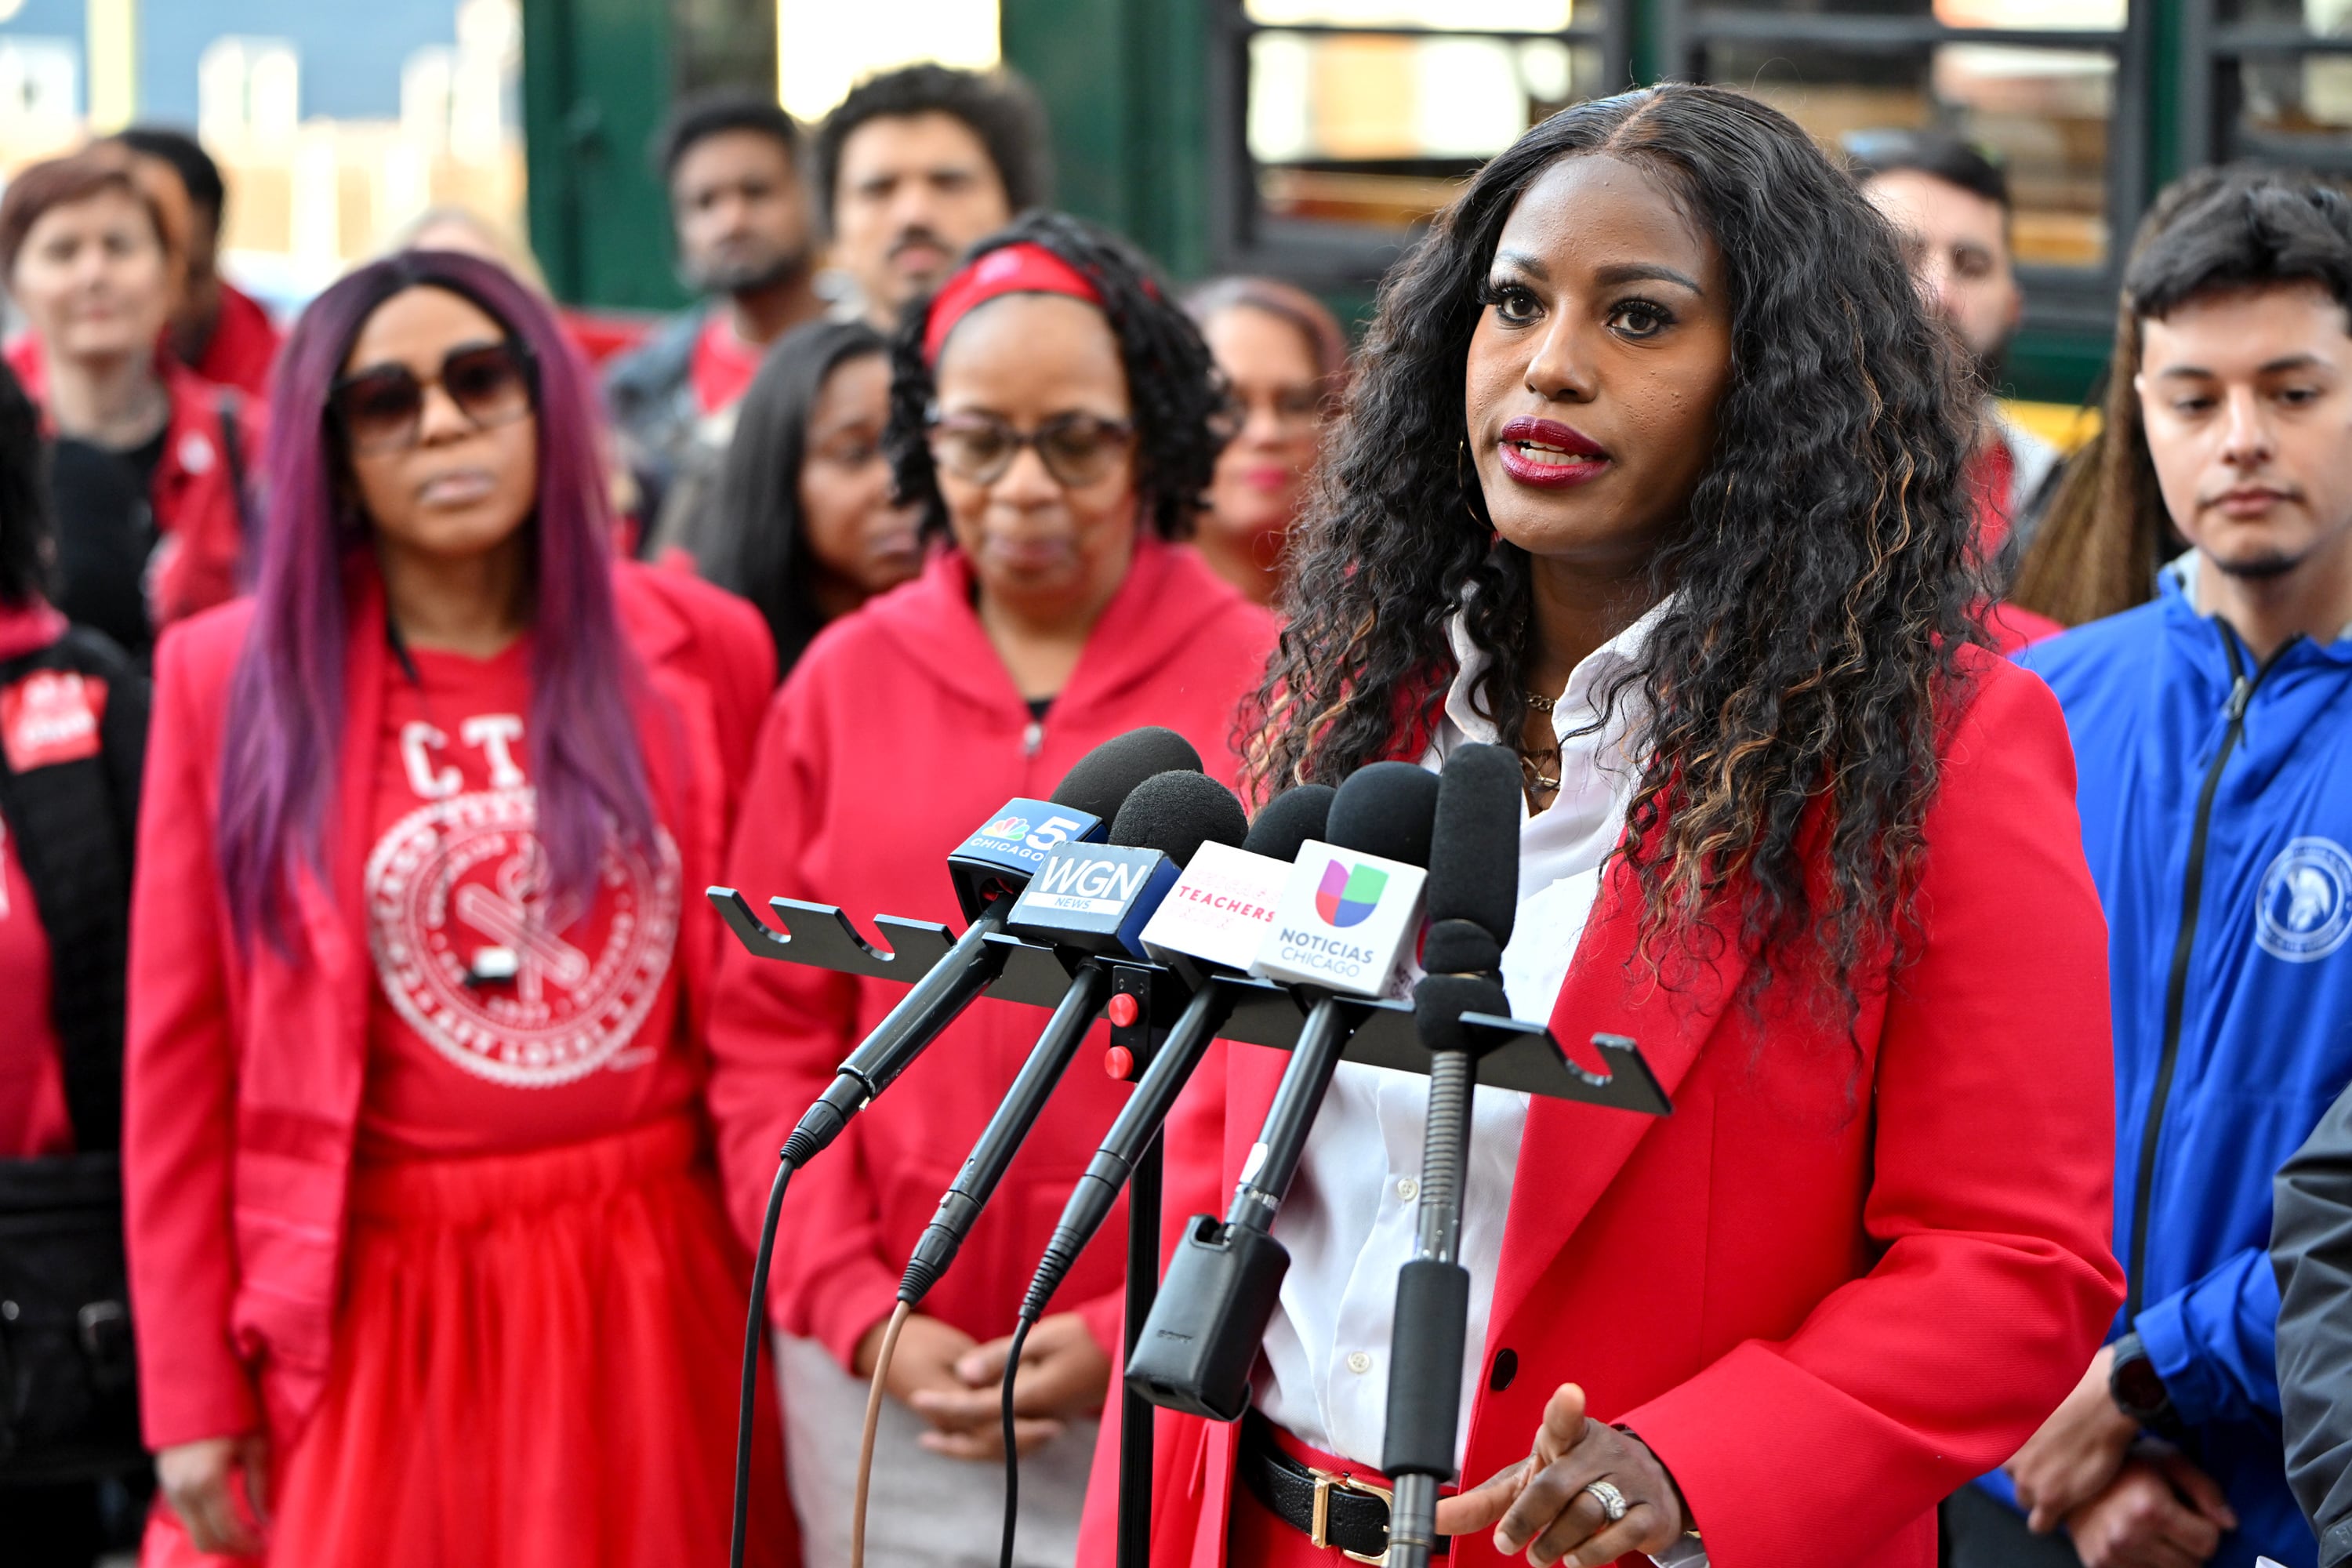 A person with short hair and wearing a red jacket, stand in front of microphones and speaks during a press conference with a group of people wearing red in the background.